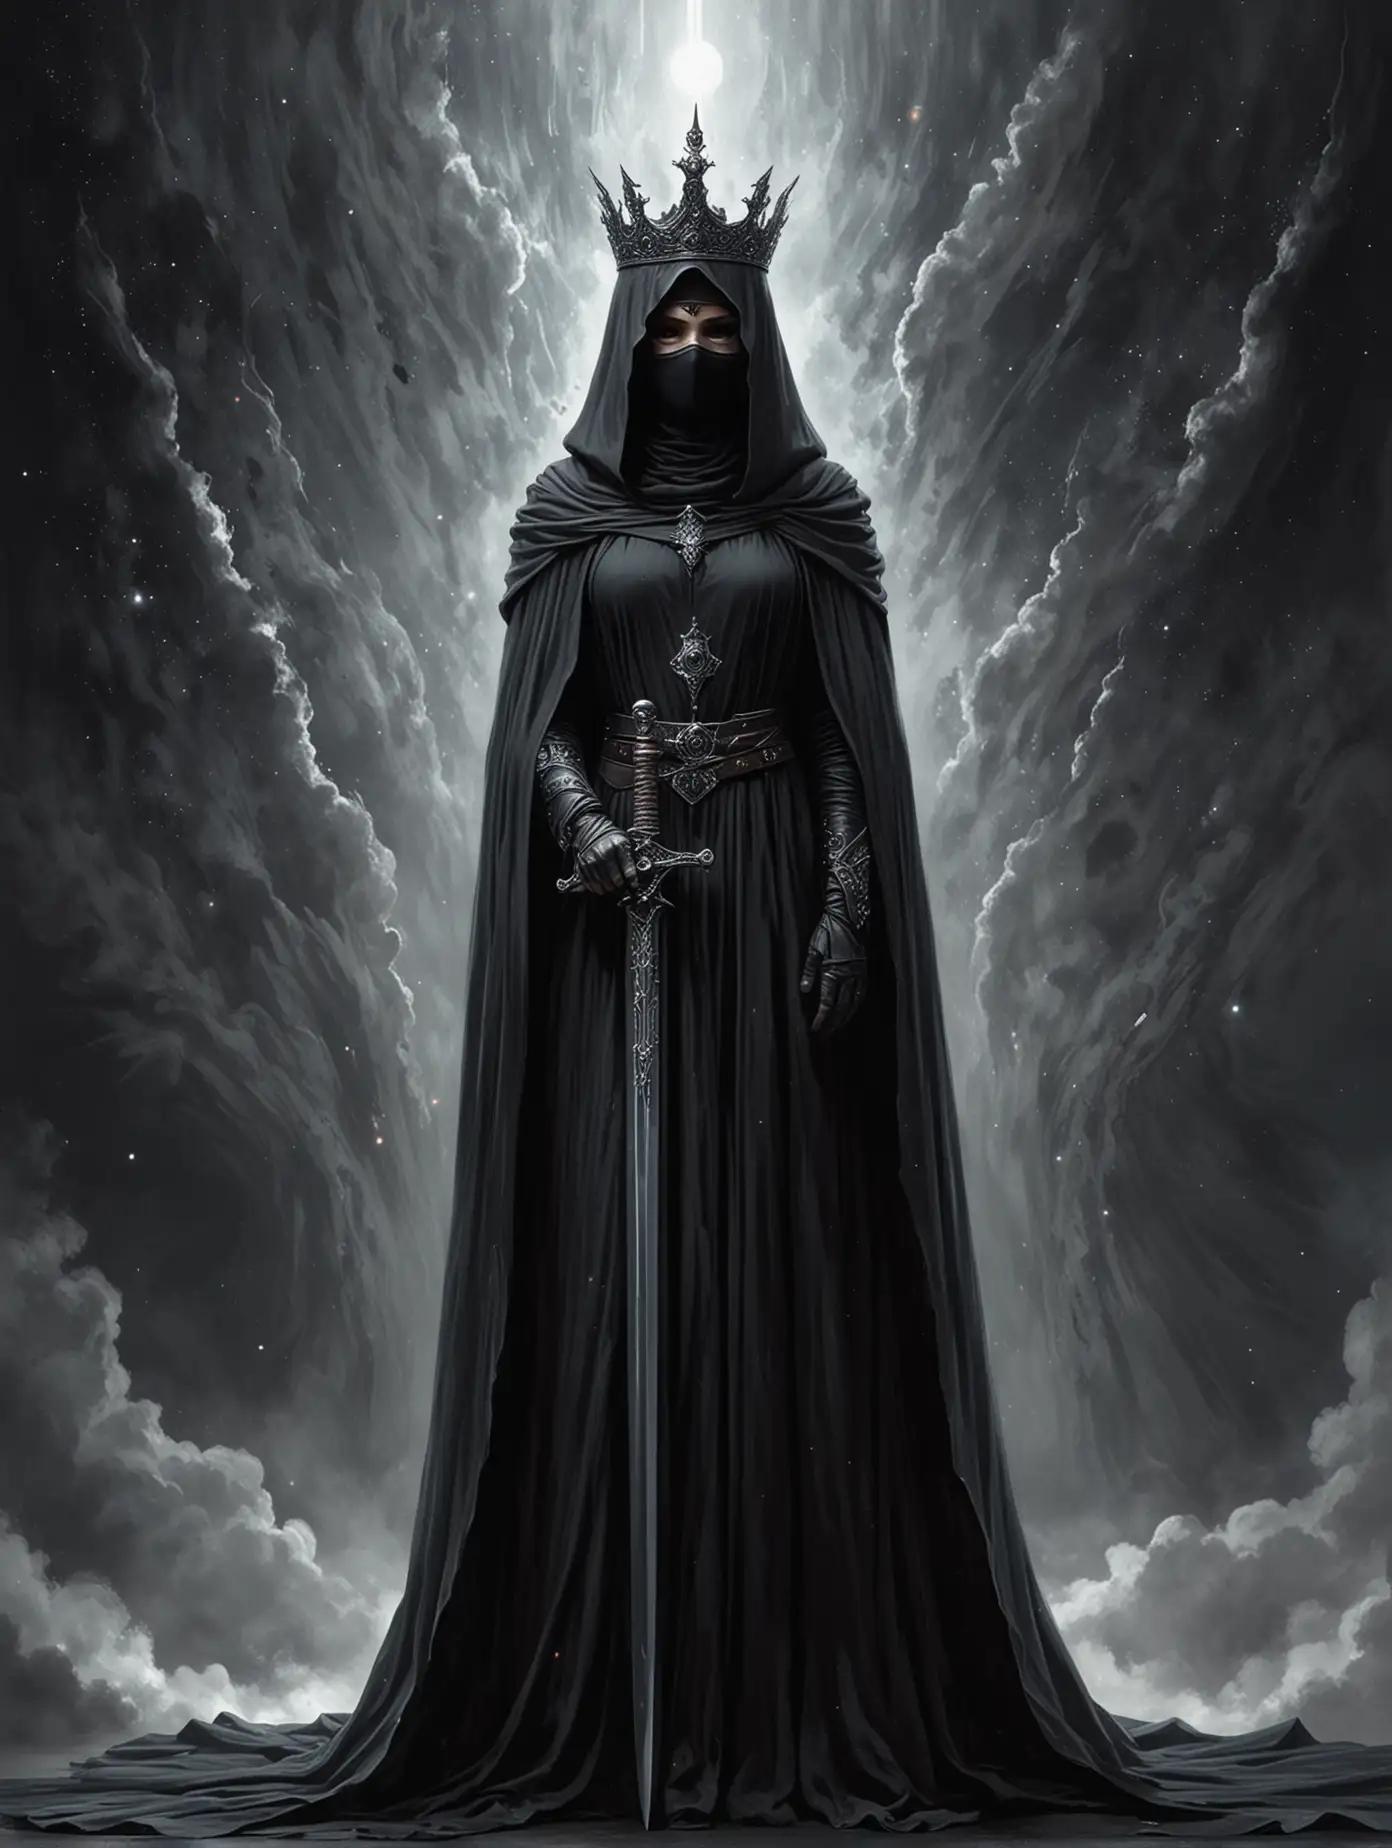 Mystical-Sister-Geserit-Stands-at-the-Edge-of-the-Cosmos-with-Black-Sword-and-Crown